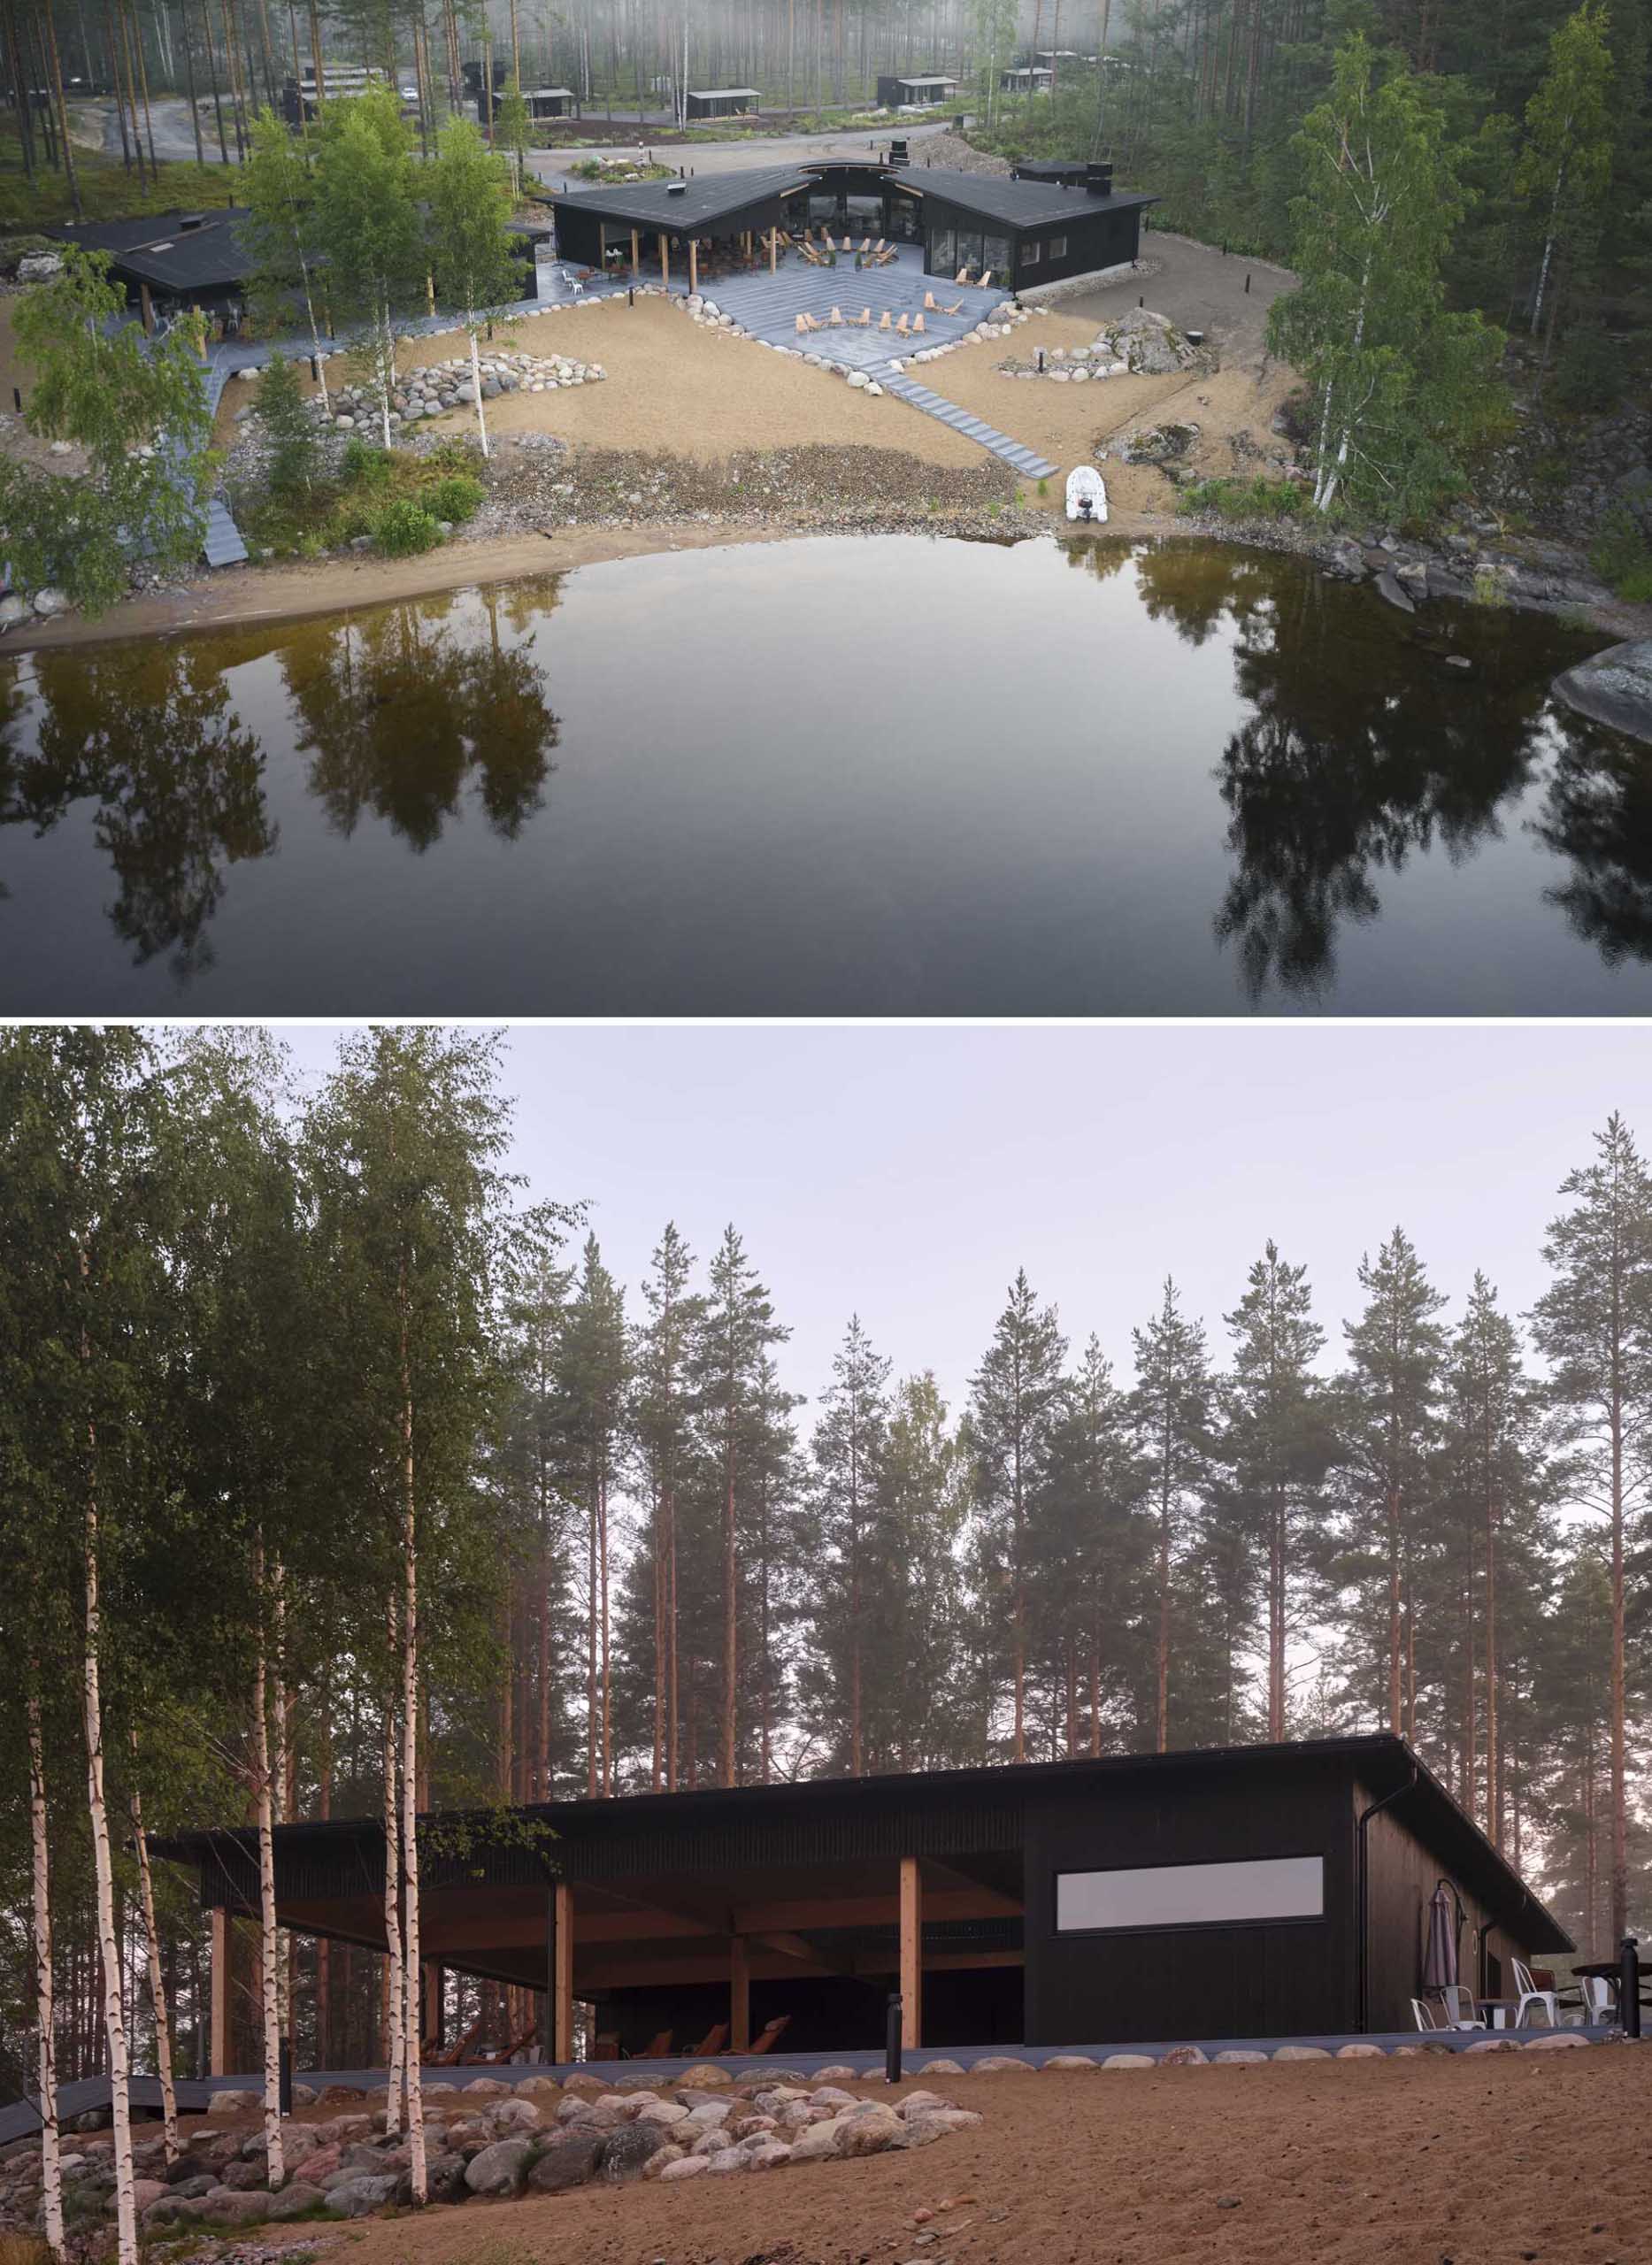 A new restaurant and sauna are situated amongst existing trees where they blend into the delicate scenery with their dark exteriors.